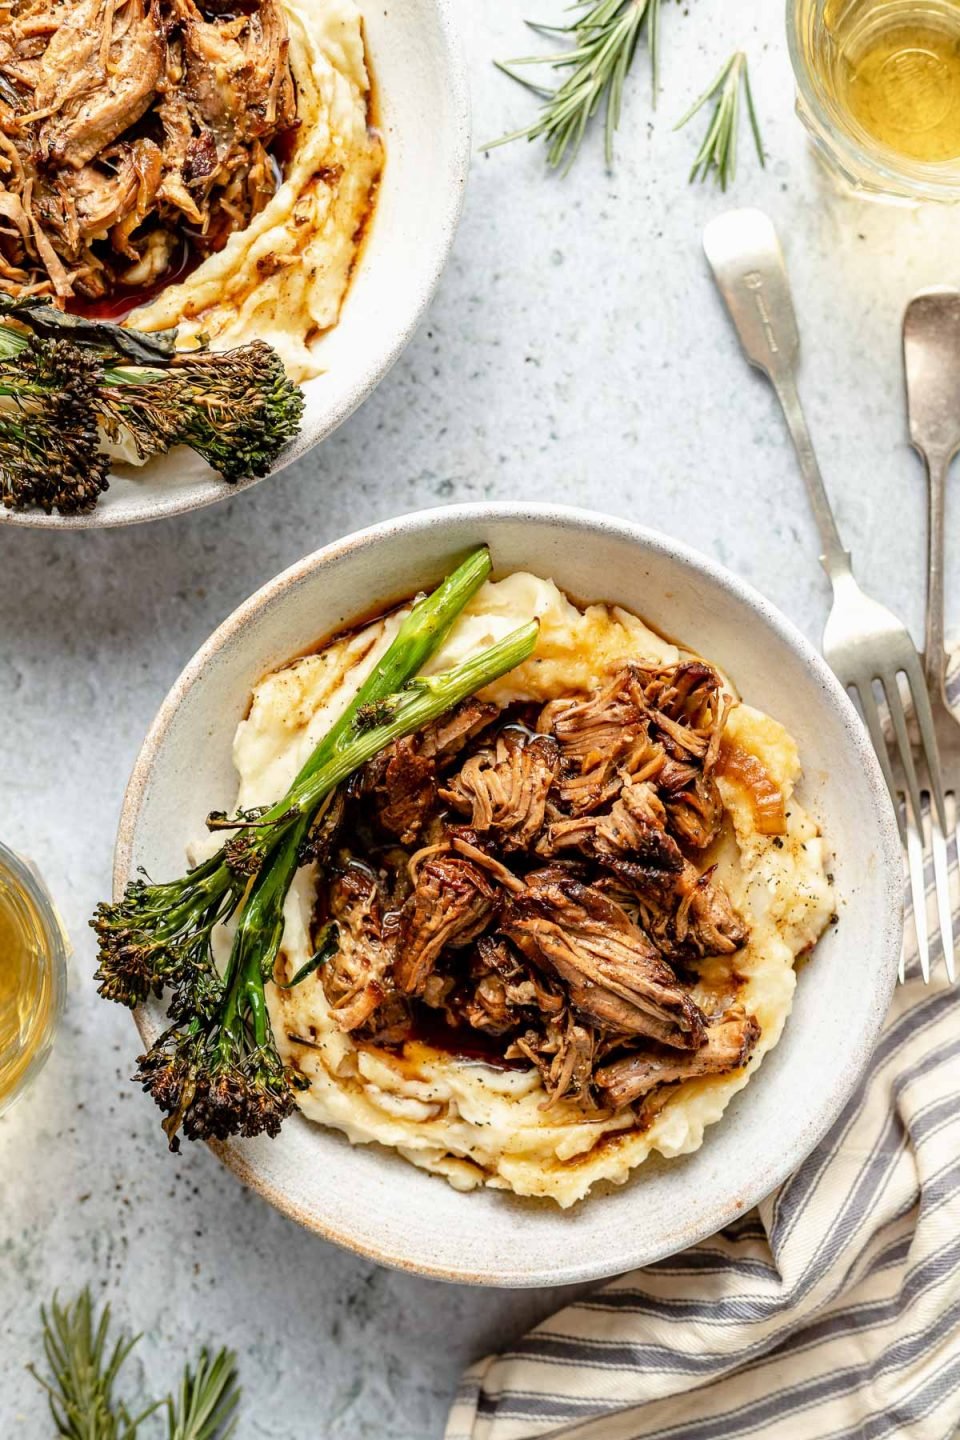 Two servings of slow cooked lamb are served over mashed potatoes in white ceramic bowls with broccolini and extra braising liquid over top. The bowls sit atop a gray textured surface with loose sprigs of rosemary, a silver fork, a striped linen napkin and a glass of white wine surrounds the bowls.